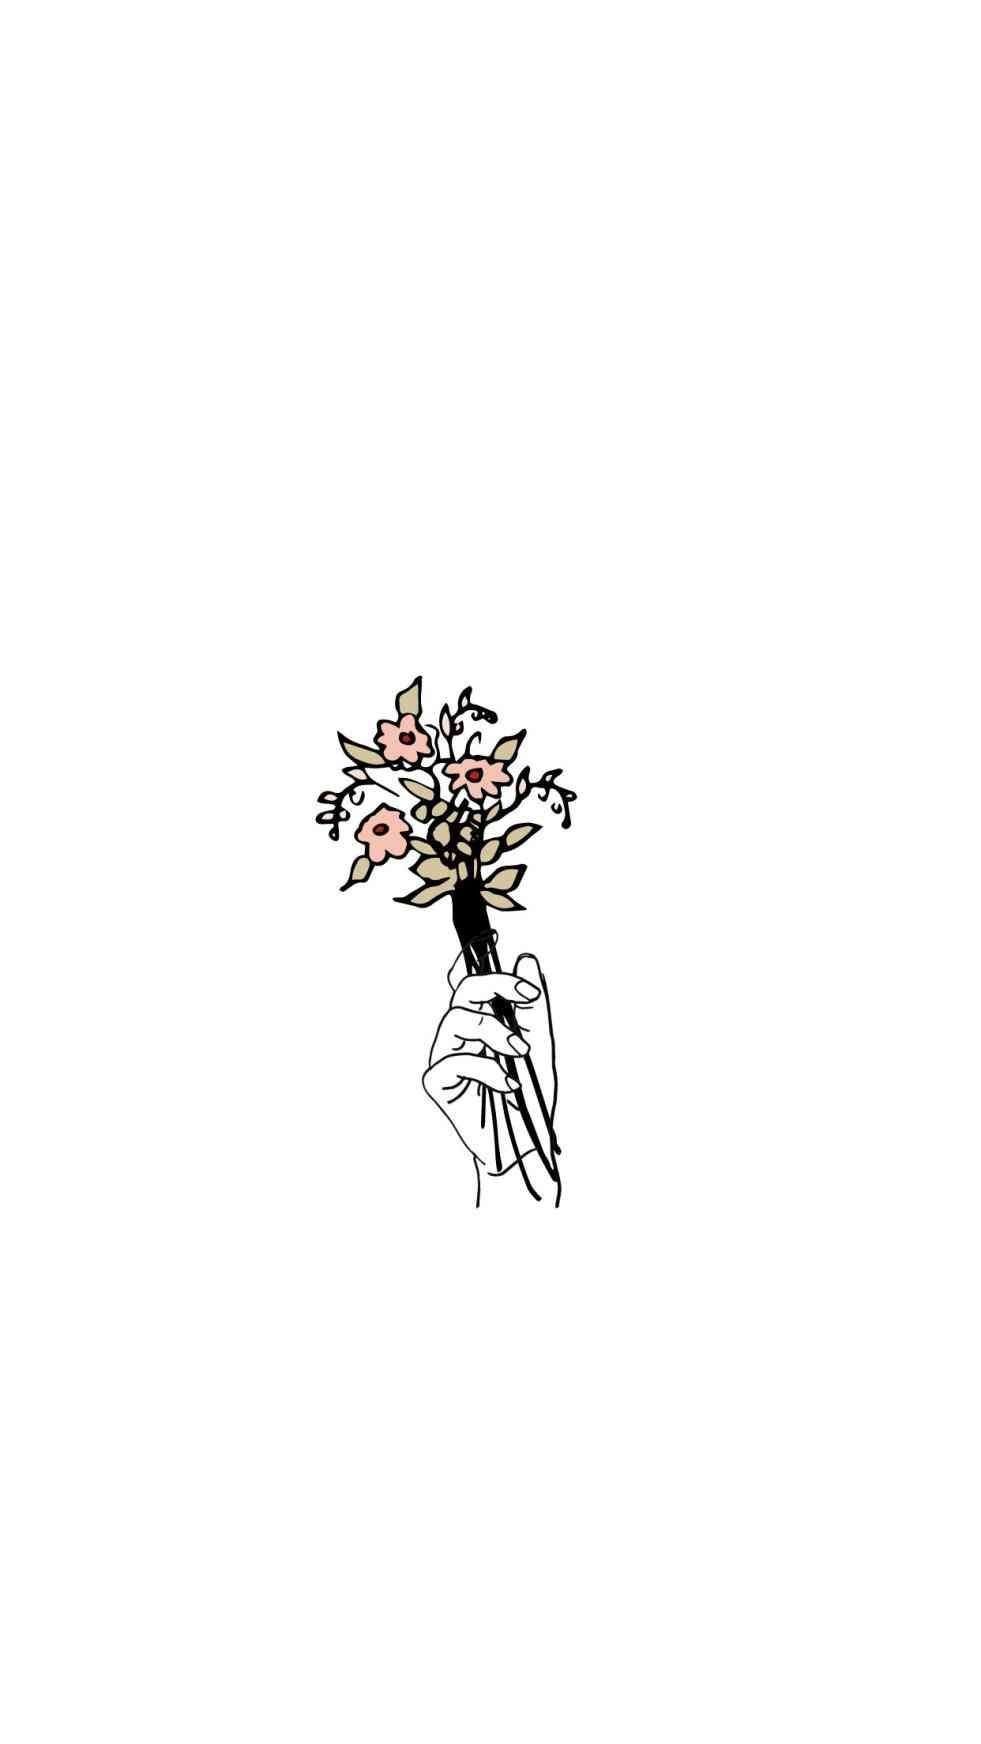 A hand holding flowers in the air - Profile picture, doodles